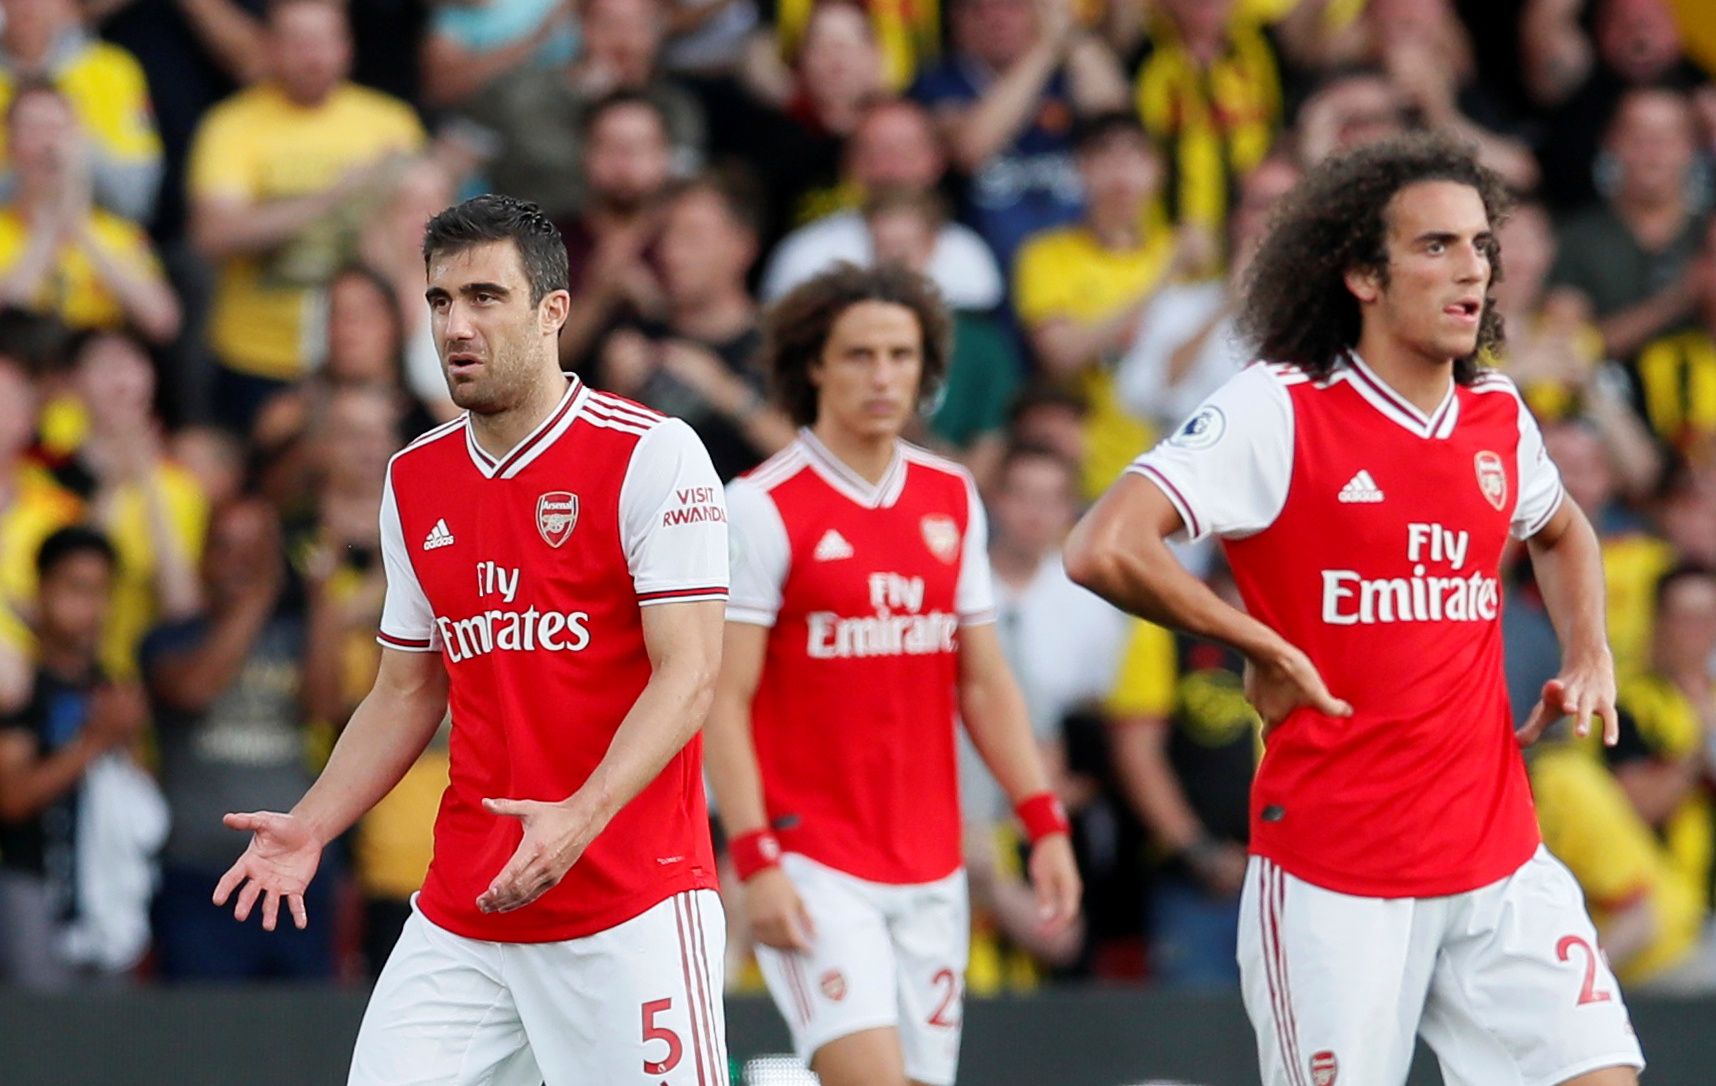 Soccer Football - Premier League - Watford v Arsenal - Vicarage Road, Watford, Britain - September 15, 2019  Arsenal's Sokratis Papastathopoulos, Matteo Guendouzi and David Luiz look dejected after conceding their first goal REUTERS/David Klein  EDITORIAL USE ONLY. No use with unauthorized audio, video, data, fixture lists, club/league logos or 